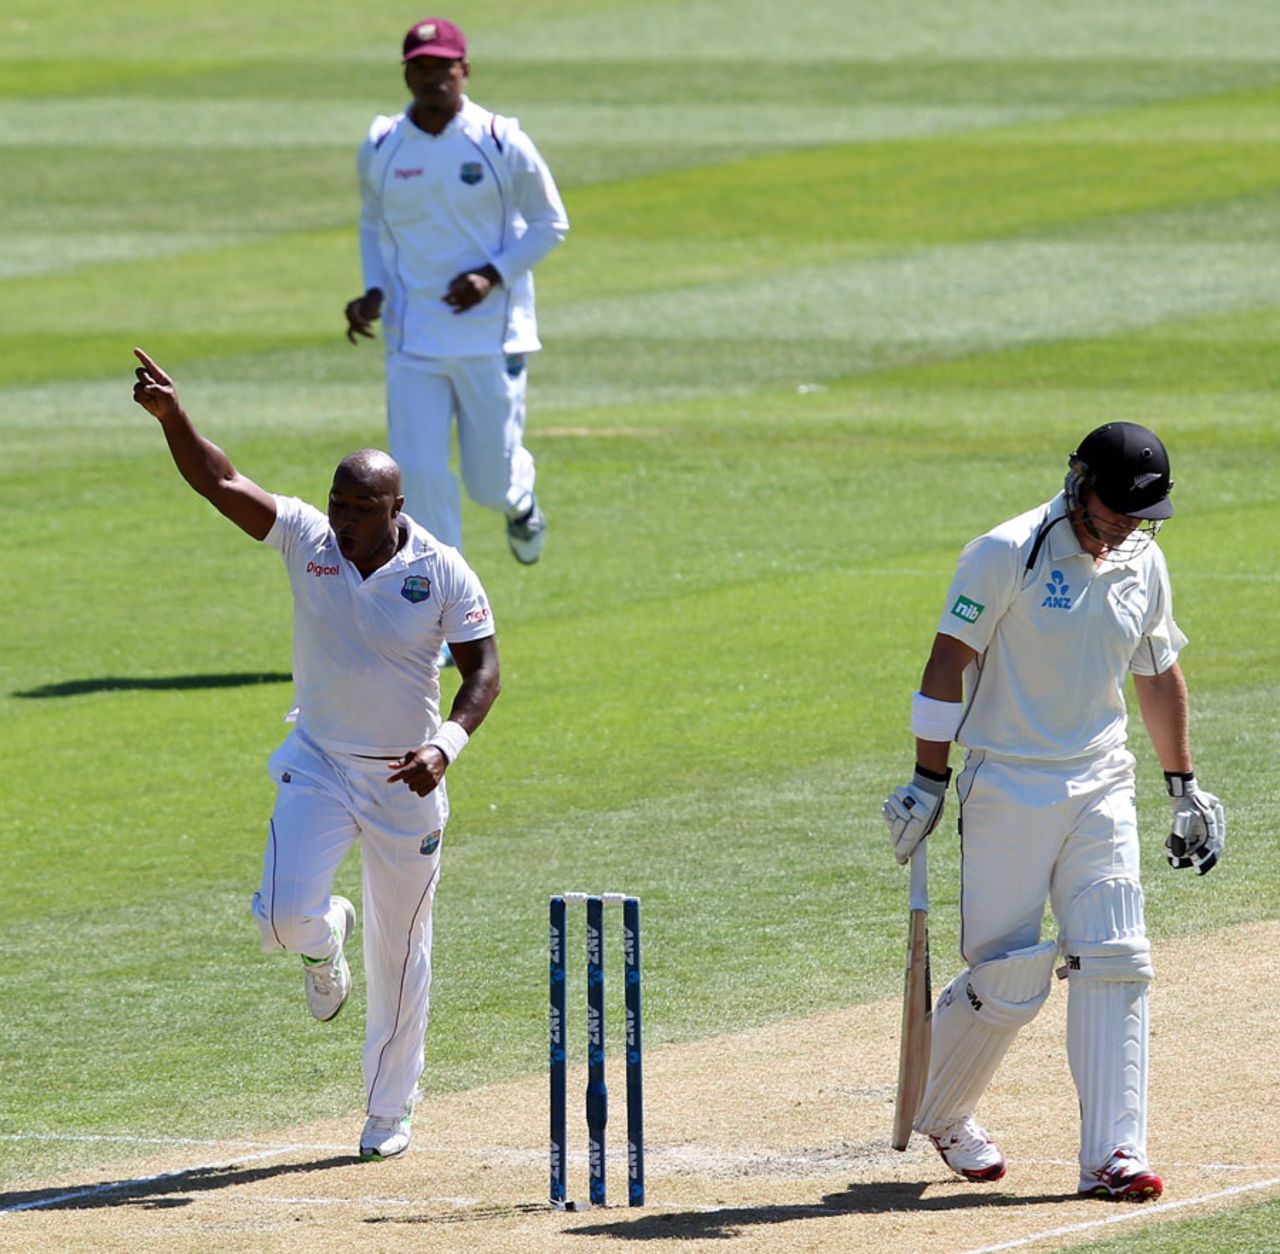 Tino Best is pumped after removing Corey Anderson, New Zealand v West Indies, 1st Test, Dunedin, 2nd day, December 4, 2013